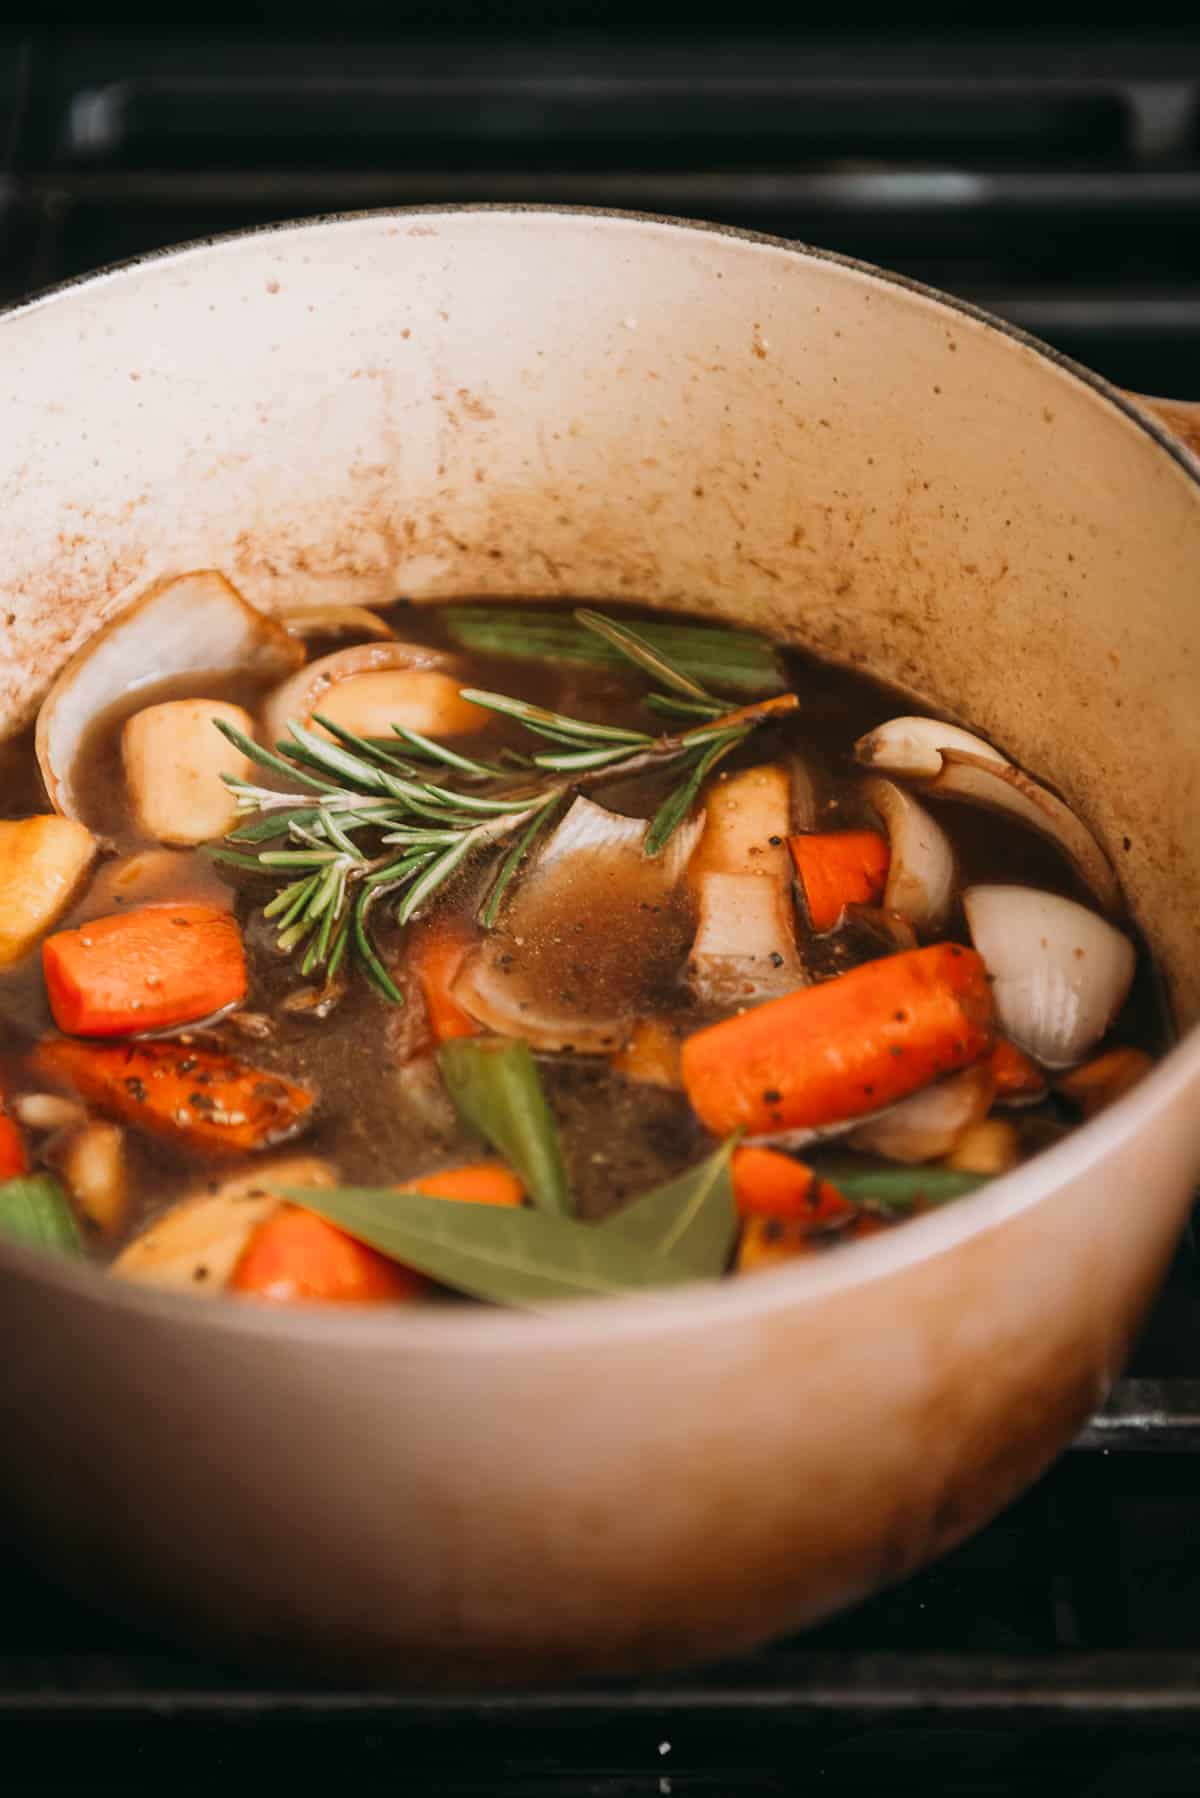 A Dutch oven of broth with carrots, onions, and sprigs of rosemary.